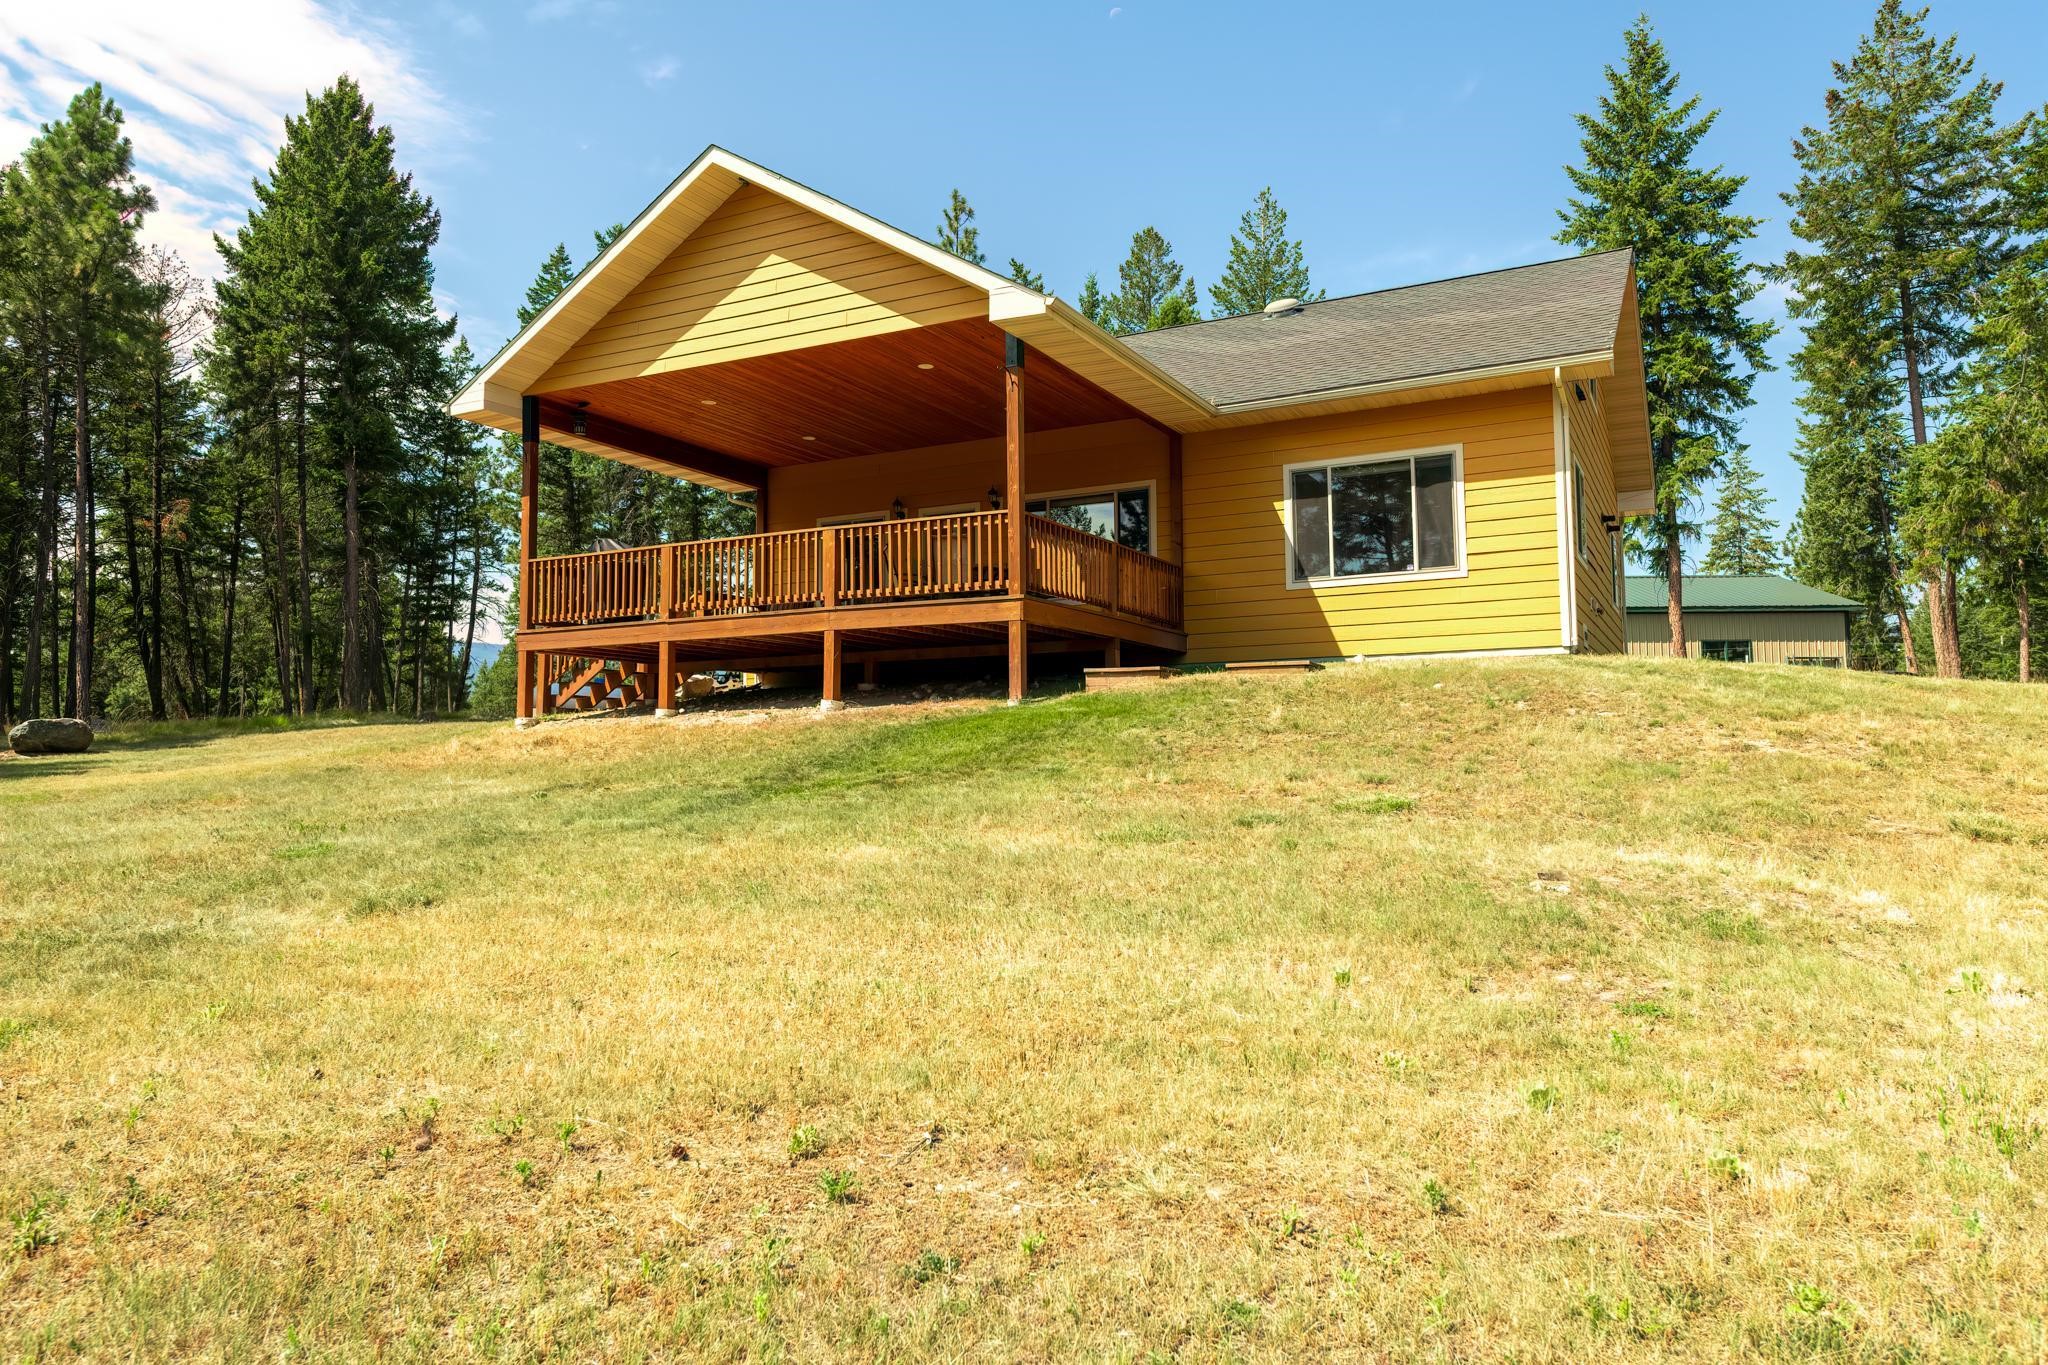 Check out the spectacular views from this exceptional, quality built home located in the charming community of the West Kootenai. The home has a great floorplan/design, utilizing every sq. ft. of space. There are 3 bedrooms on the main floor along with 2 full baths and a large bonus room upstairs. It has a cozy kitchen with a custom wood breakfast bar and a huge covered deck to take in the serene valley and lake views. The location is in the heart of Amish country and is just a short hike to the General Store, so as you're traveling down the road, keep your eyes open for horse & buggie's, bicycles and local baking stands. This property is less then 2 miles to the beautiful, sought after Lake Koocanusa which has an abundance of wildlife and National Forest land nearby that will provide endless outdoor recreation and activities to enjoy. The home's furnishings are negotiable. For more information contact Gary Mason (406) 261-6979 or your real estate professional.